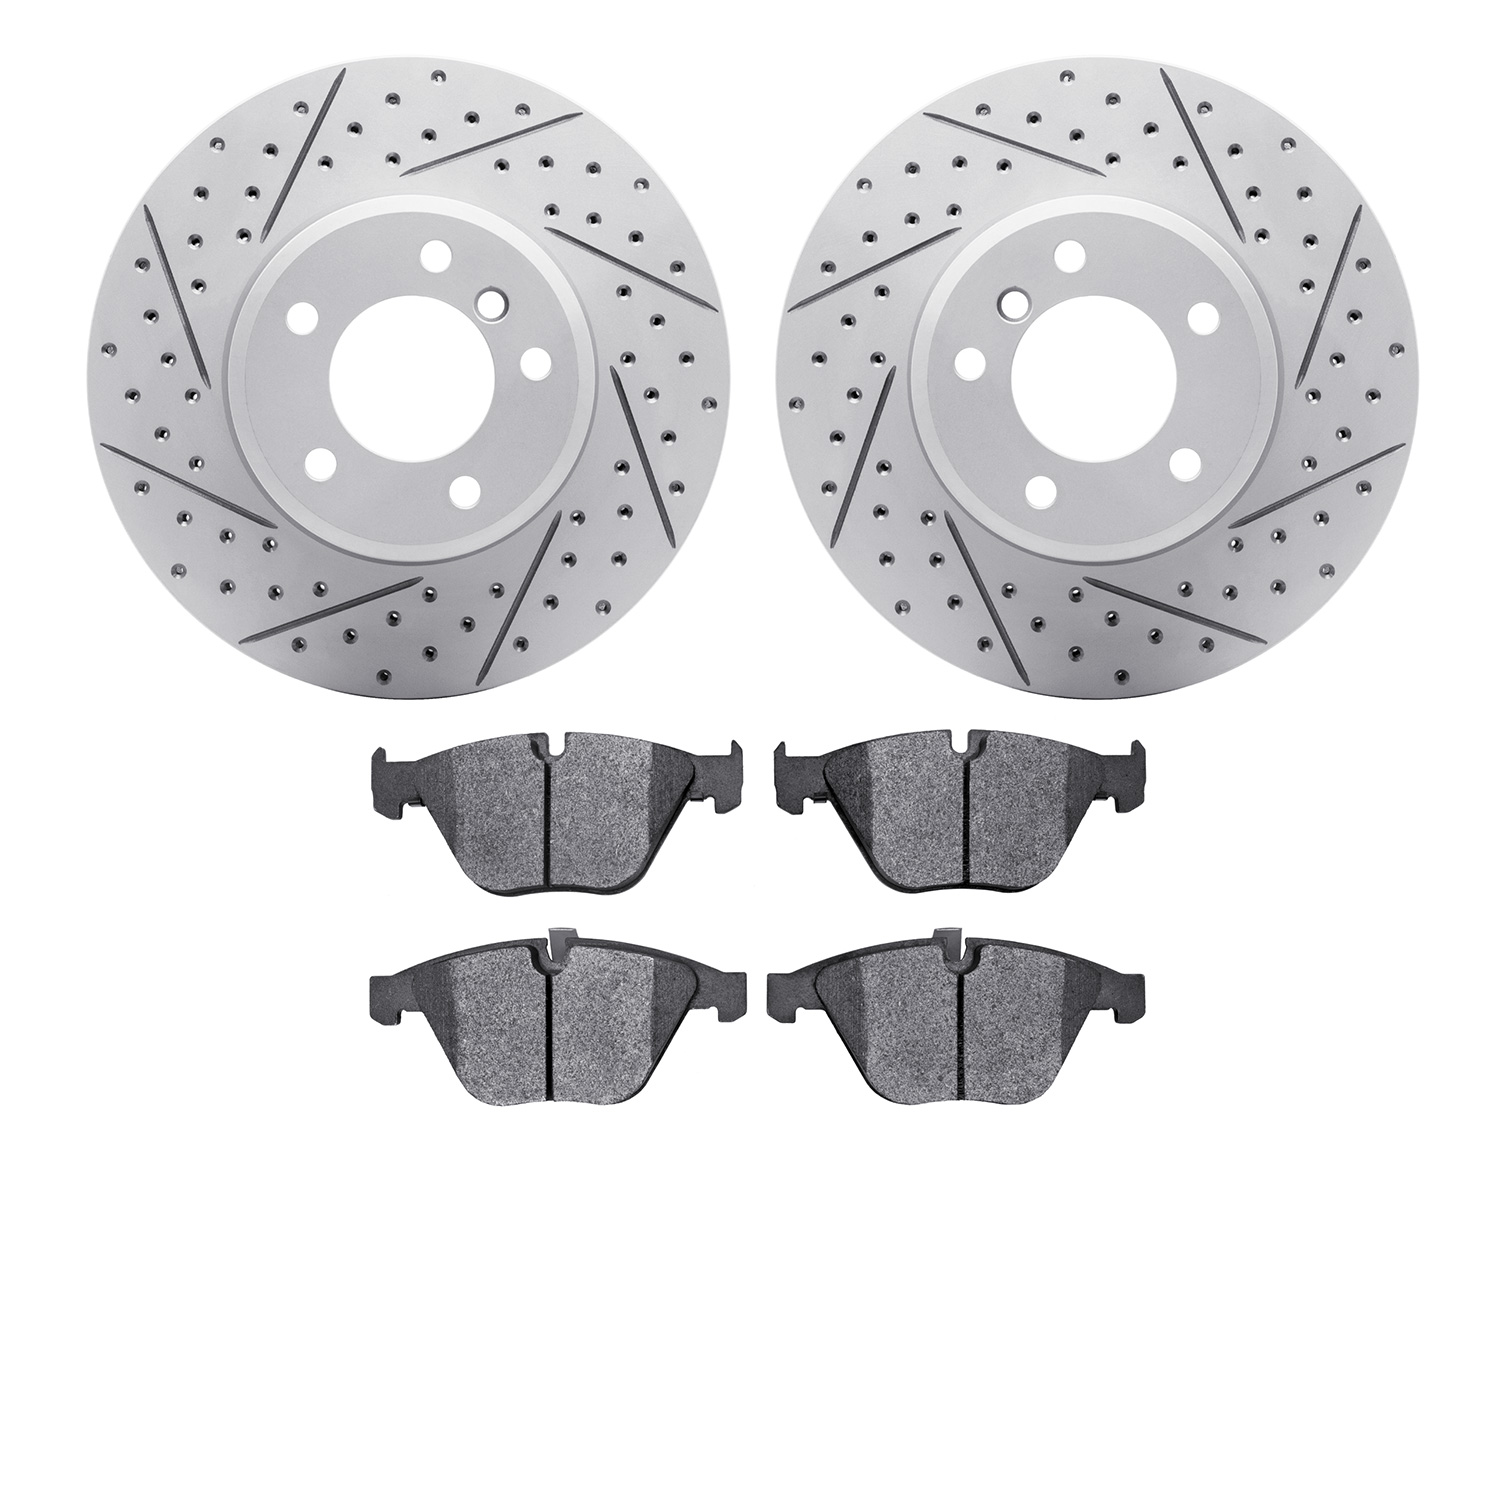 2502-31042 Geoperformance Drilled/Slotted Rotors w/5000 Advanced Brake Pads Kit, 2004-2010 BMW, Position: Front